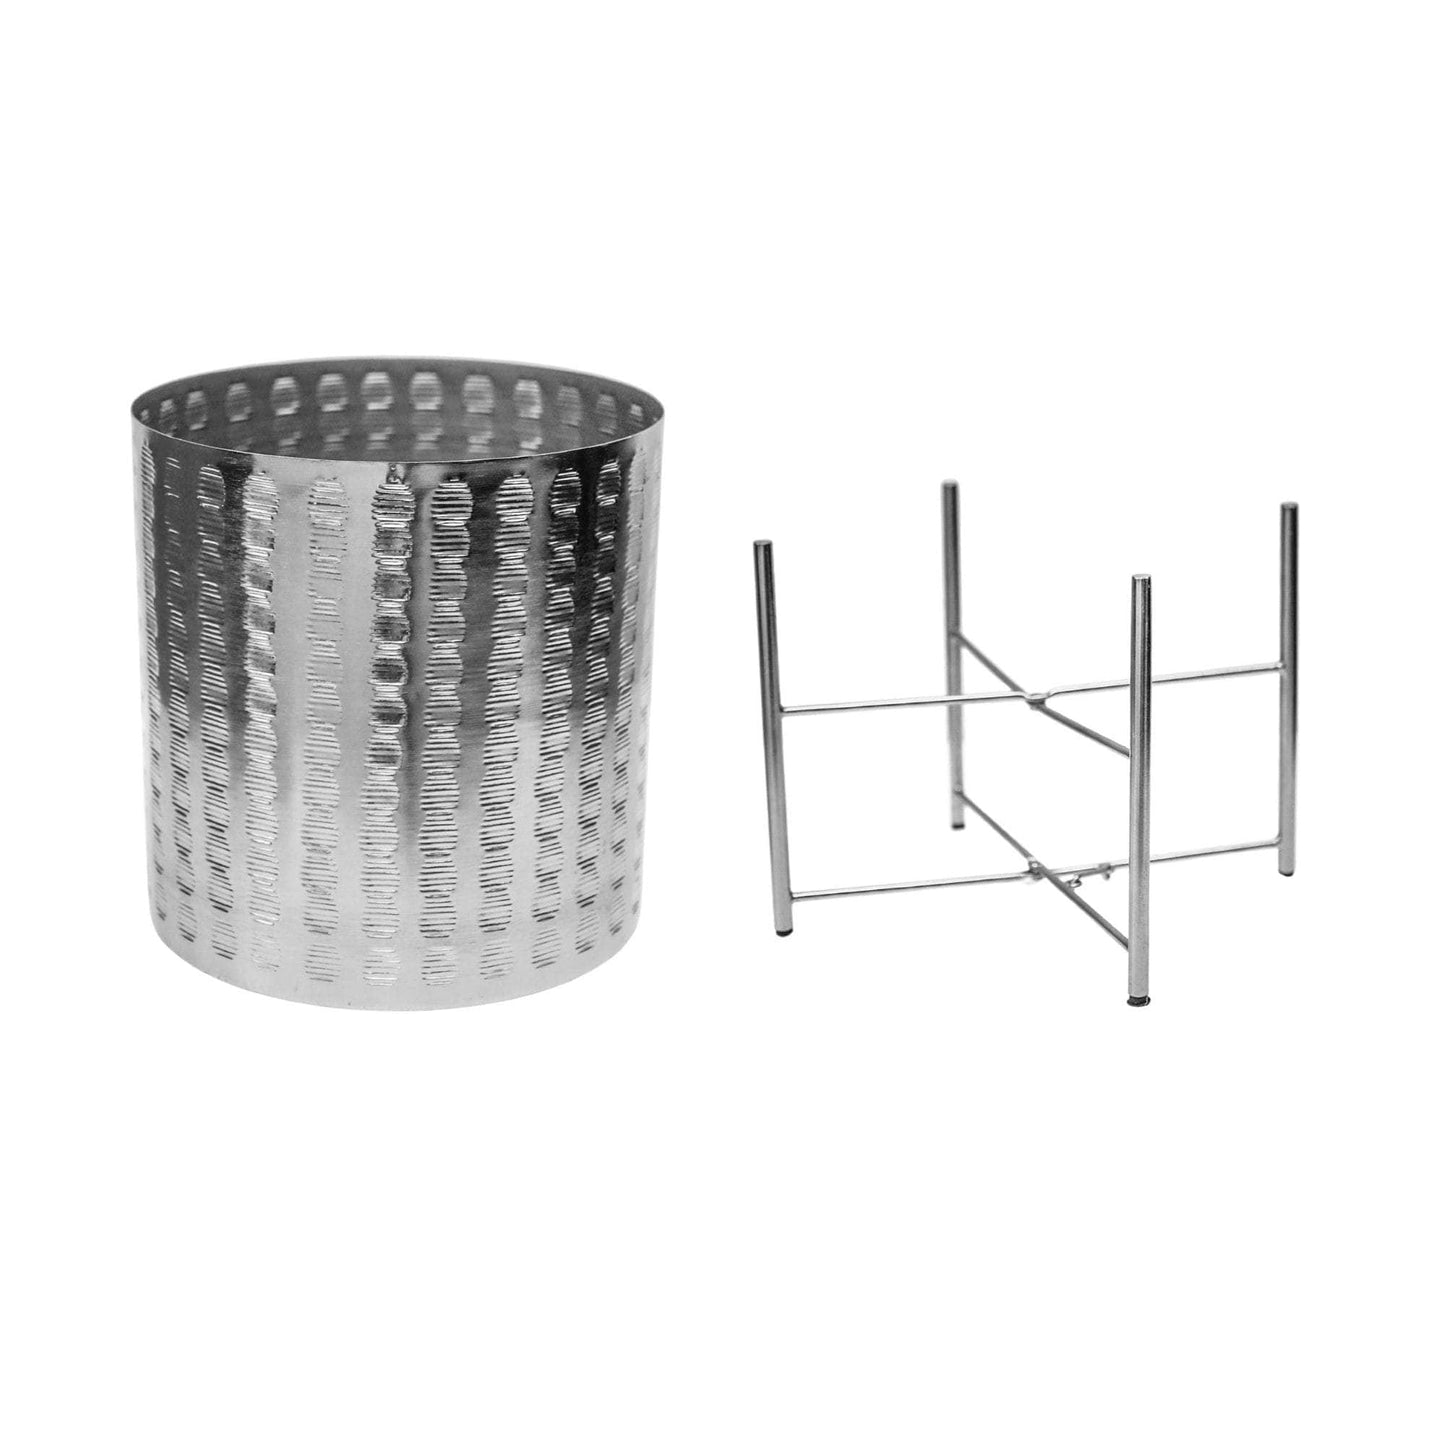 Zendaya Silver Embossed Metal Planter with Stand